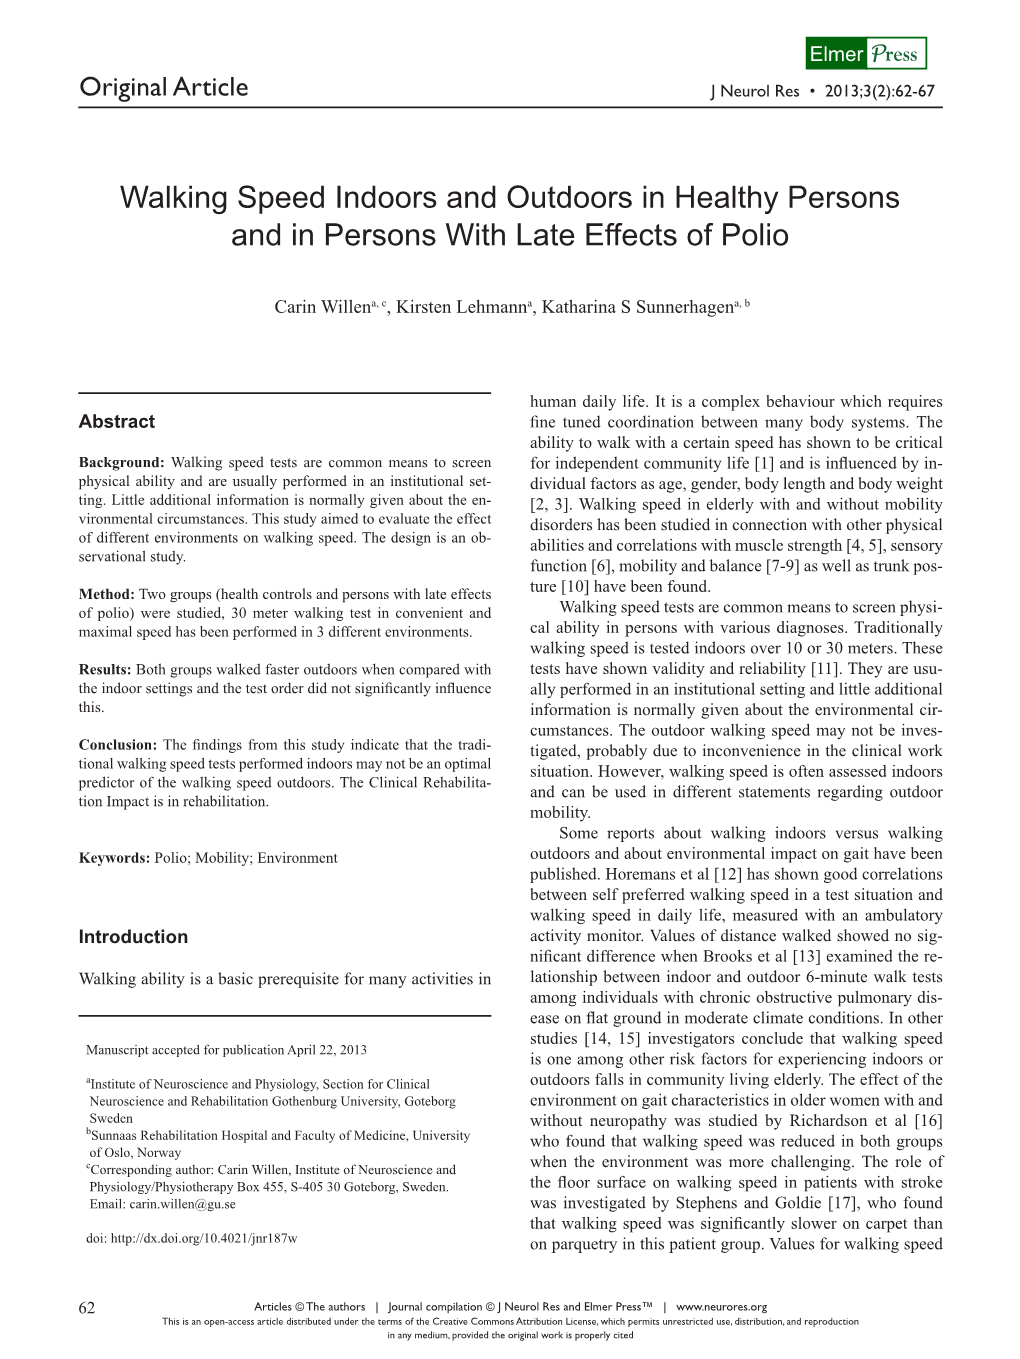 Walking Speed Indoors and Outdoors in Healthy Persons and in Persons with Late Effects of Polio